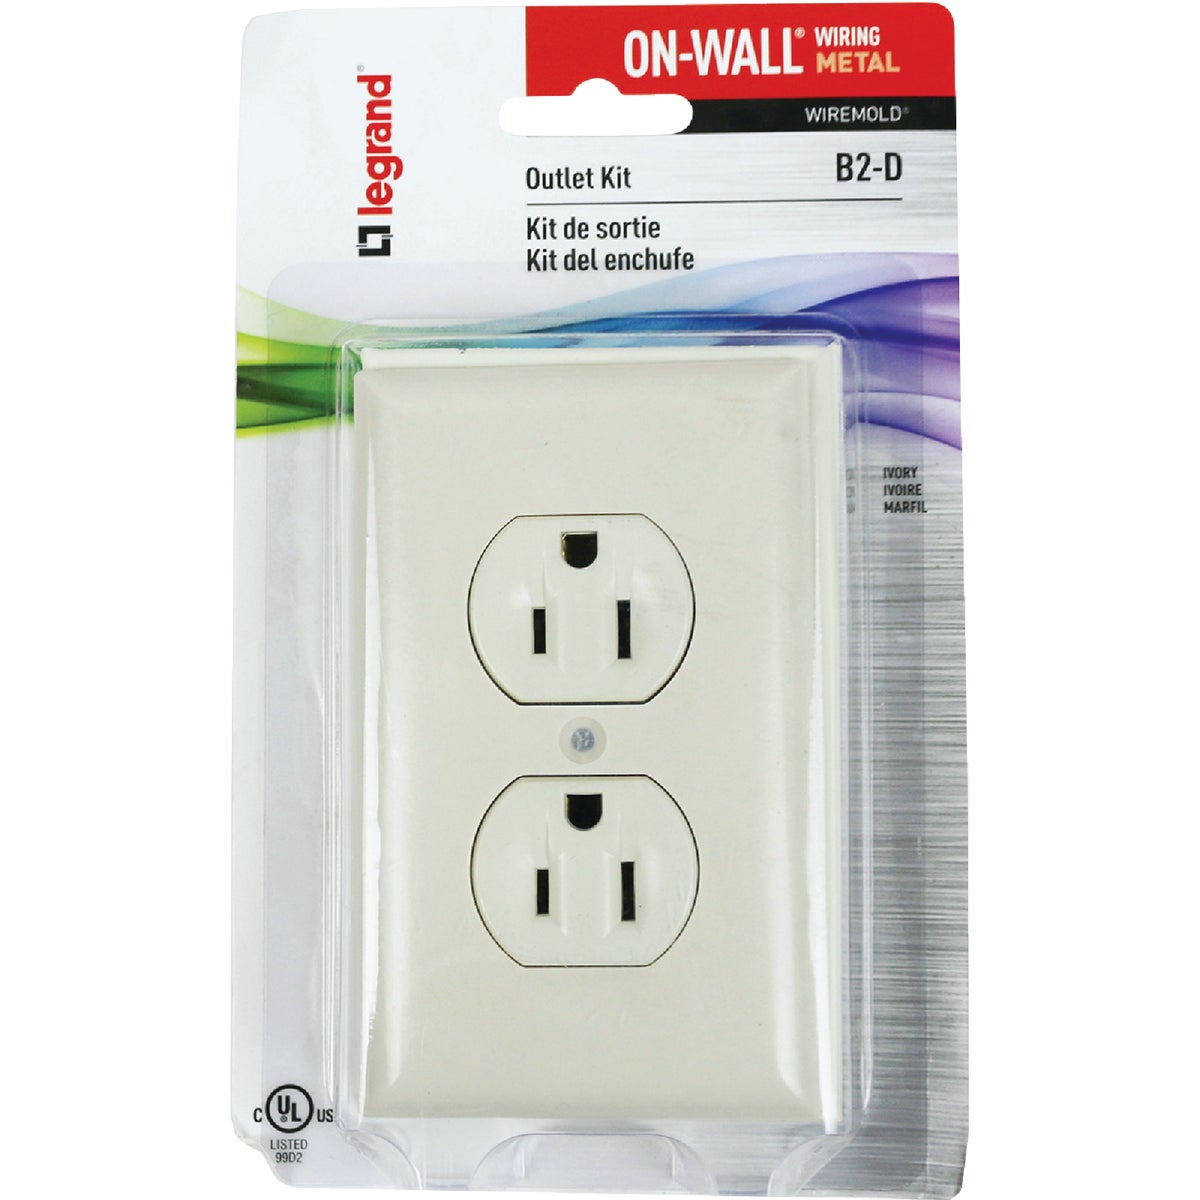 Wiremold On-Wall Ivory Metal 1 In. Outlet Box Kit